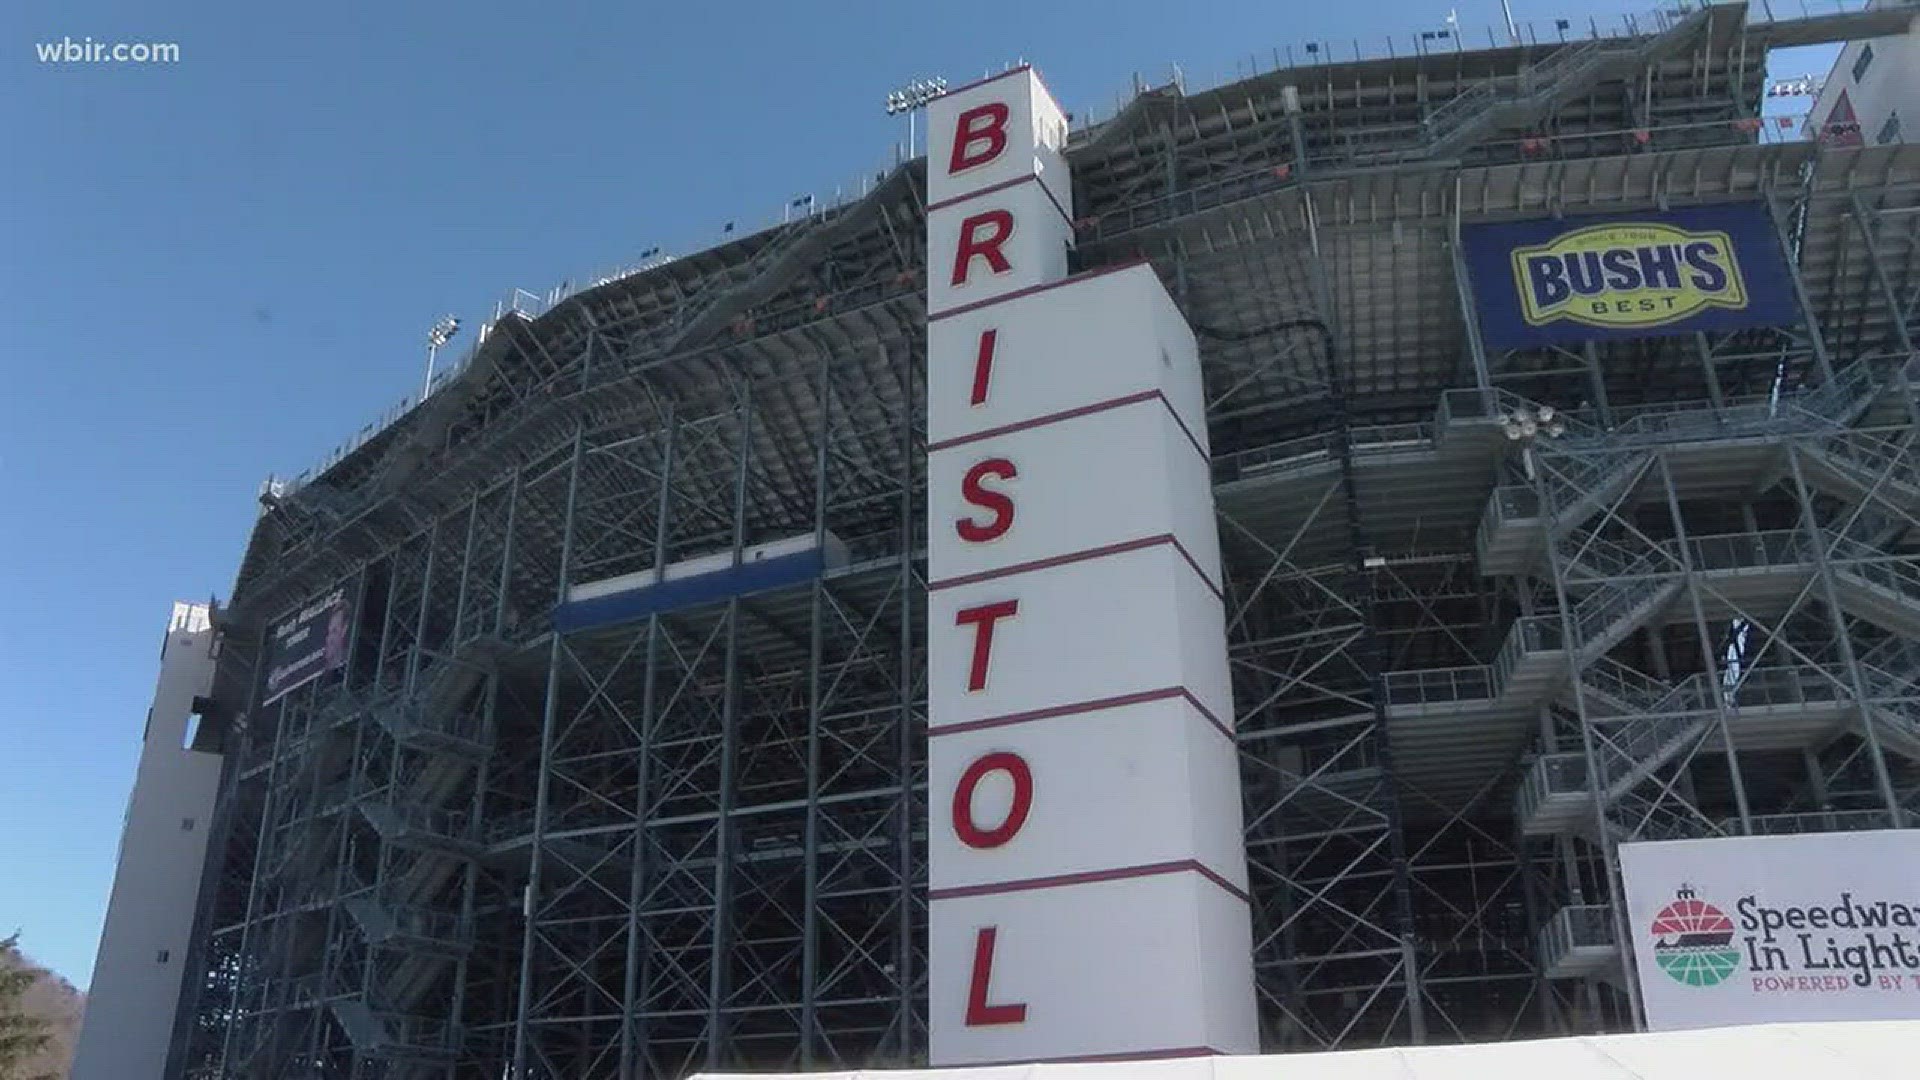 Jan. 19, 2018: 85 people will get the chance to rappel over the Bristol Motor Speedway tower.